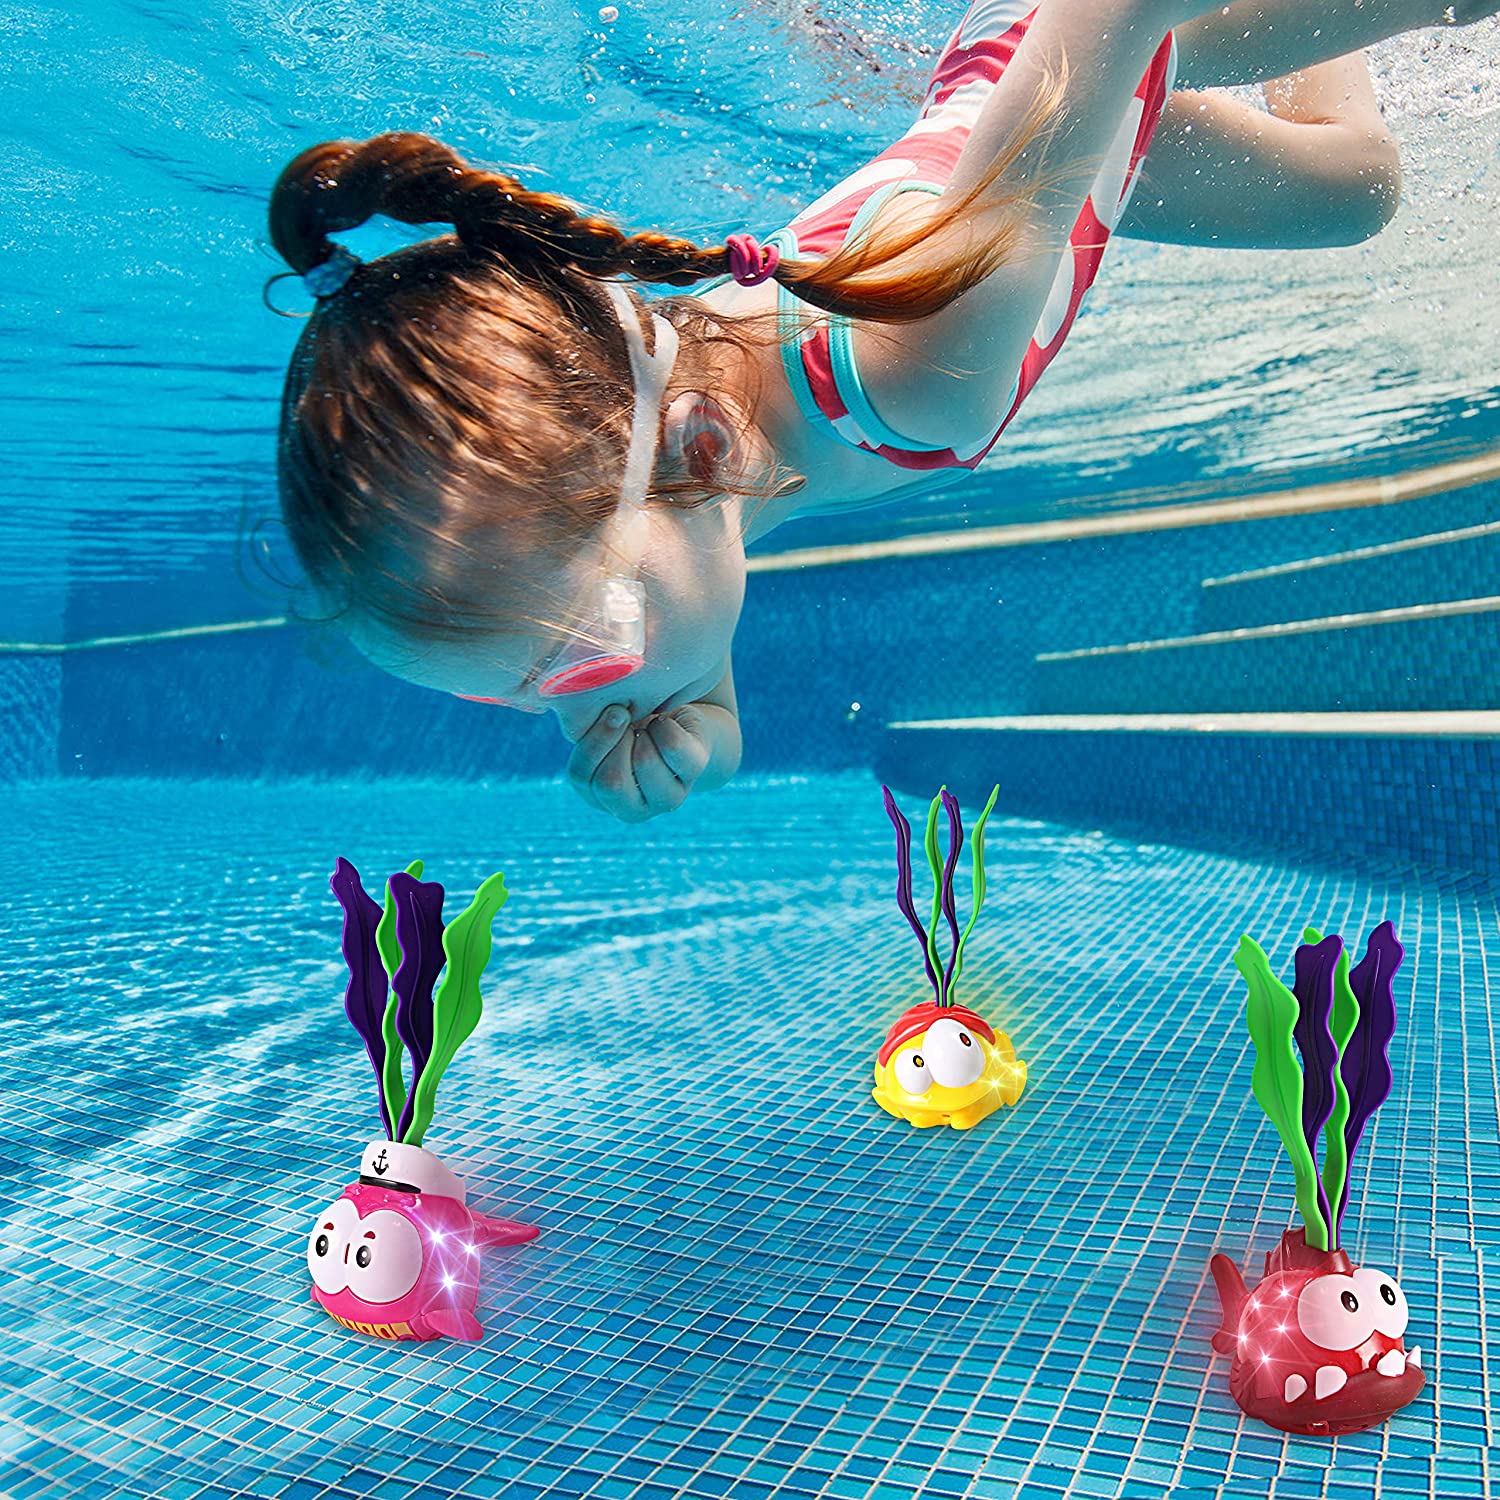 JOYIN Light-up Diving Pool Toys Set, 6 Packs of Diving Toy Animals, Pool Party Games, Underwater Sinking Swimming Pool Toy for Kids